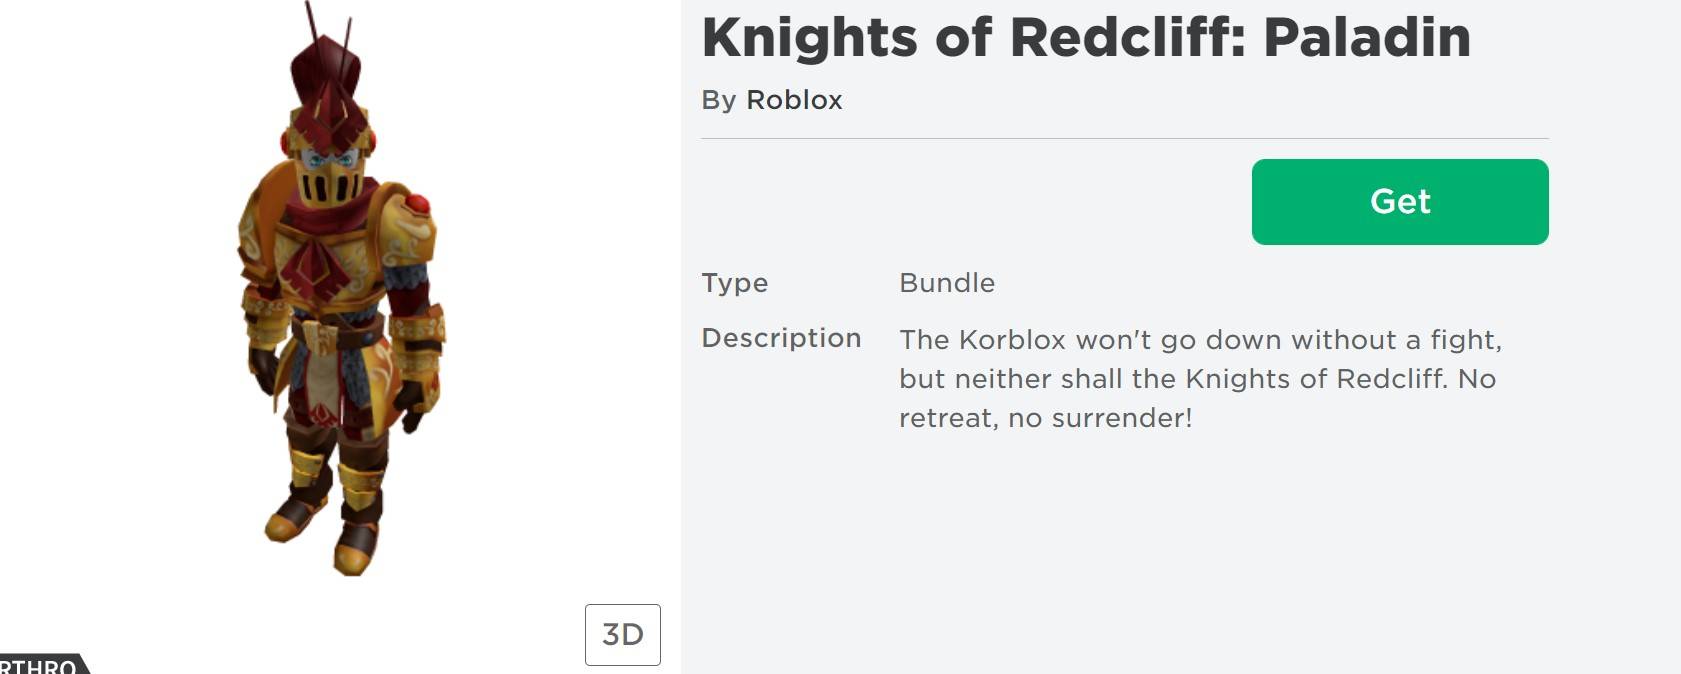 Roblox Promo Codes For Free Items In June 2021 - roblox catalog free items 2021